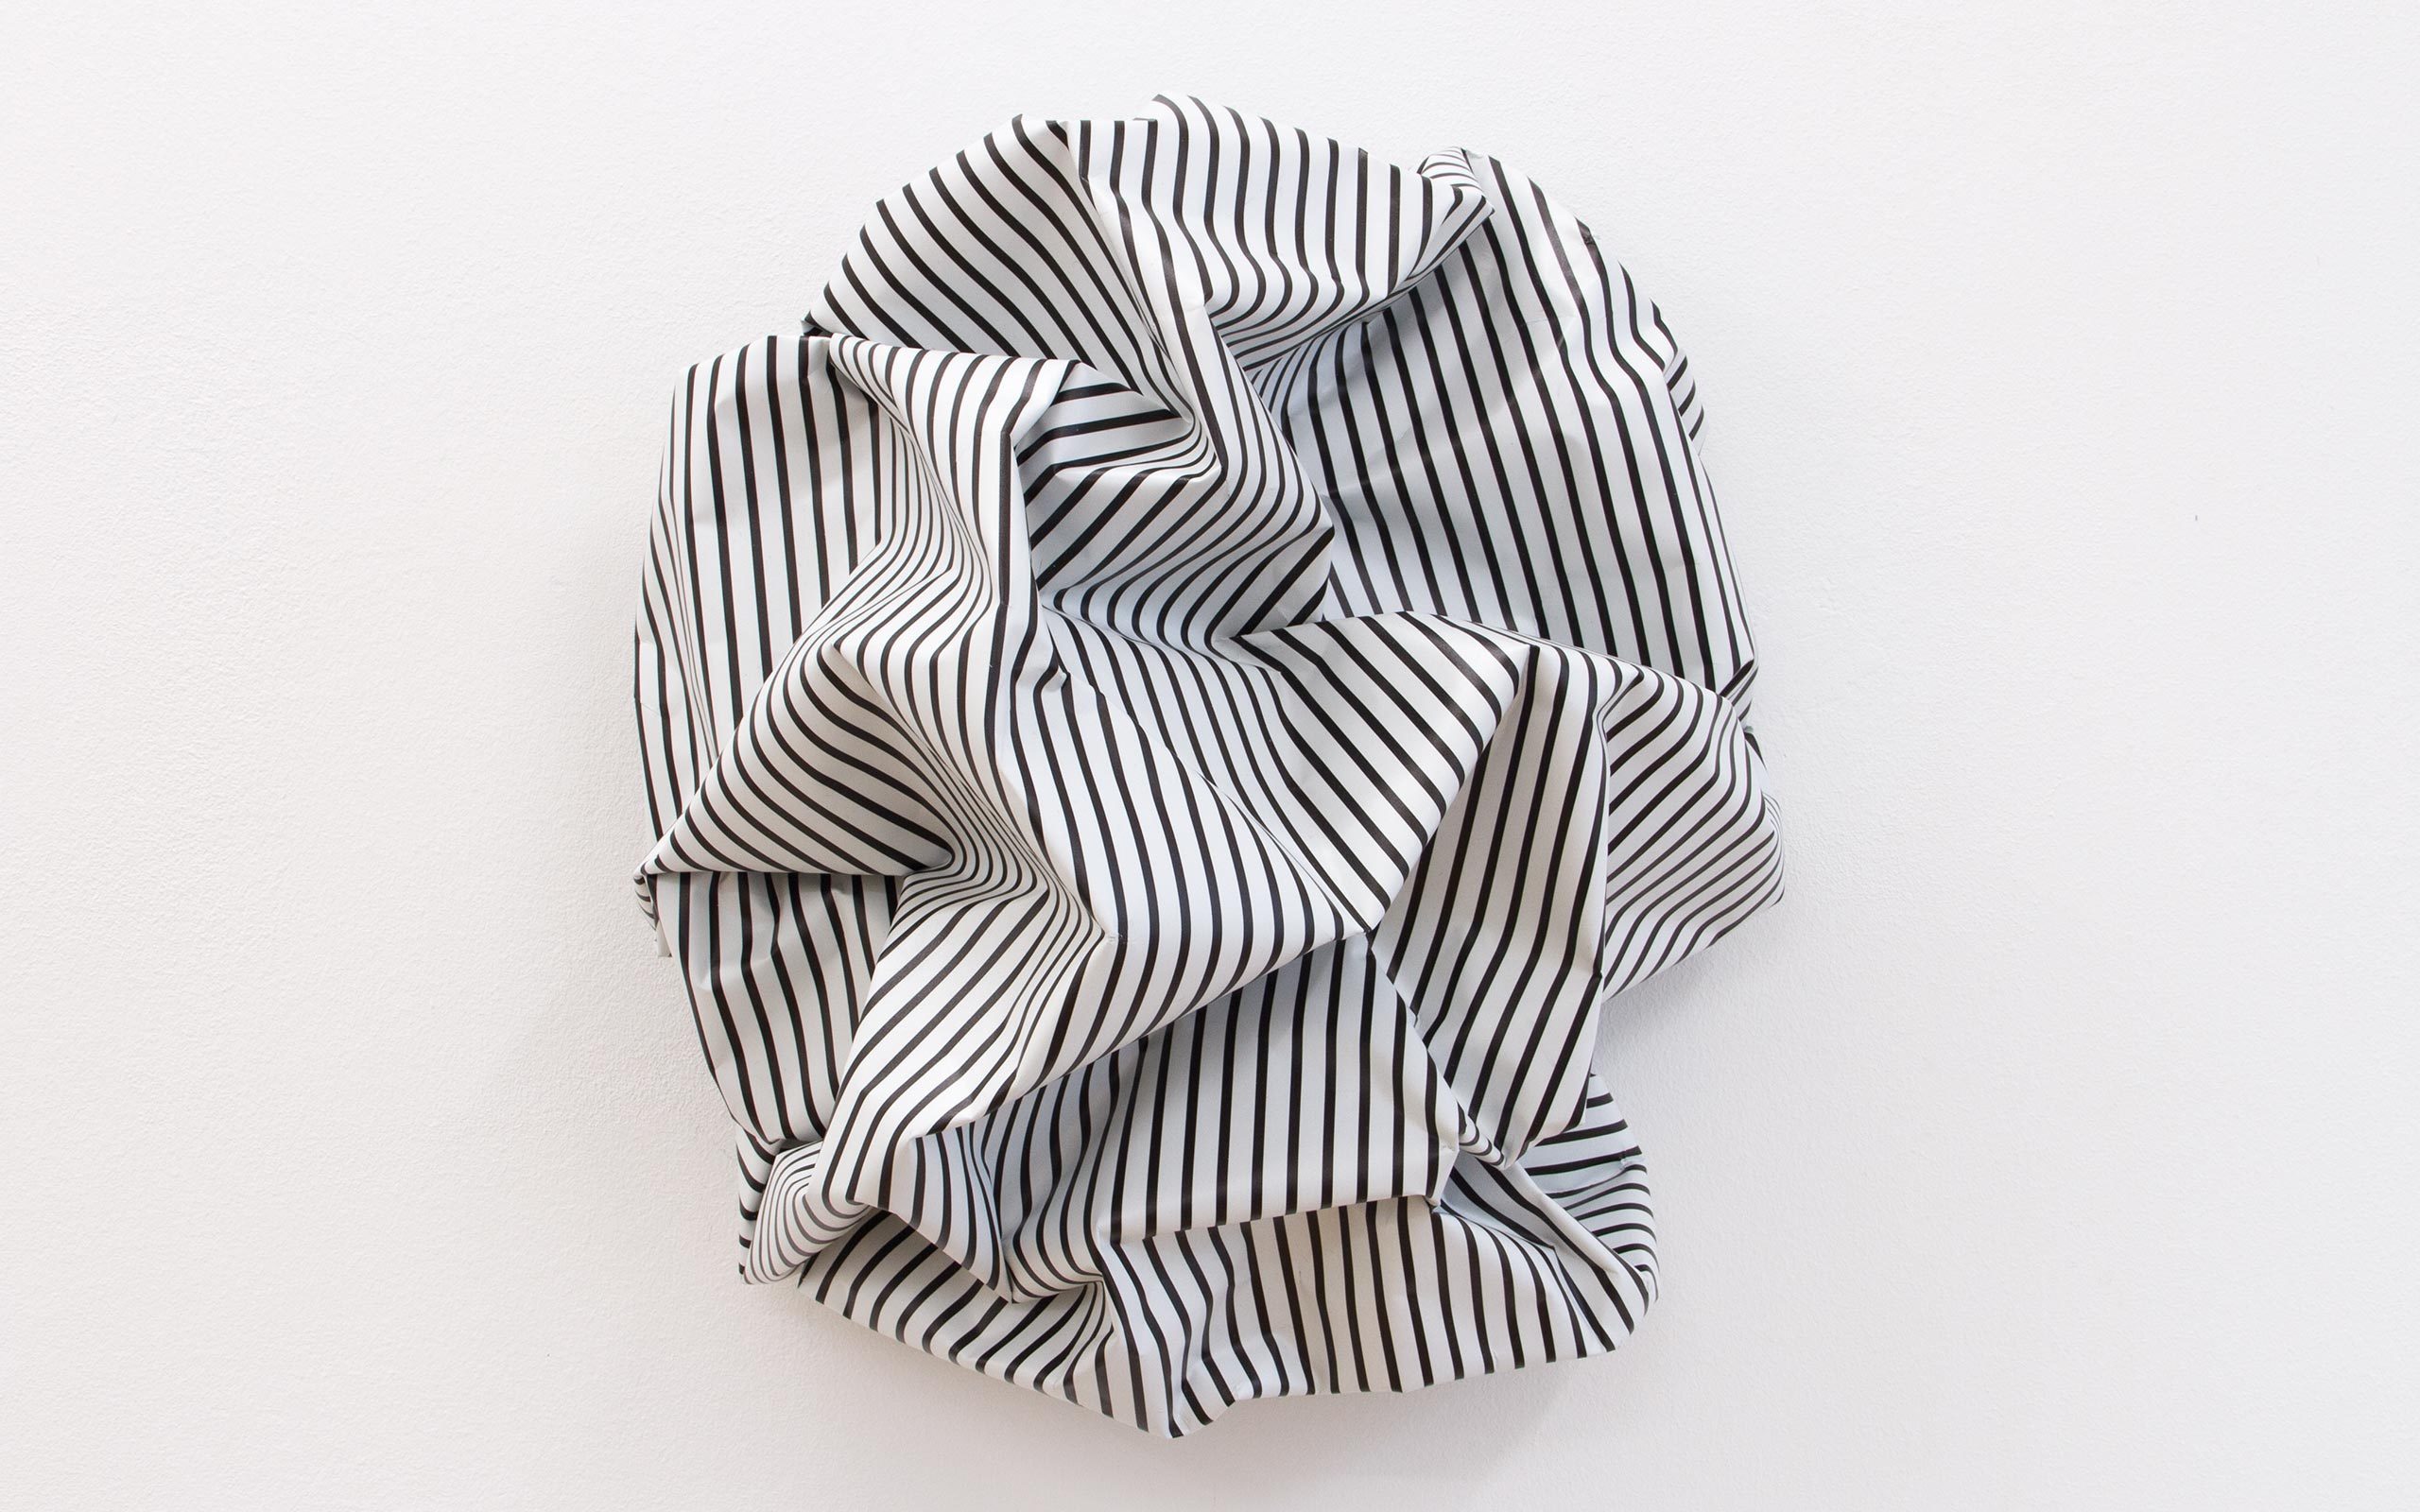 With her “creased sculptures” Esther Stocker folds and distorts the ...